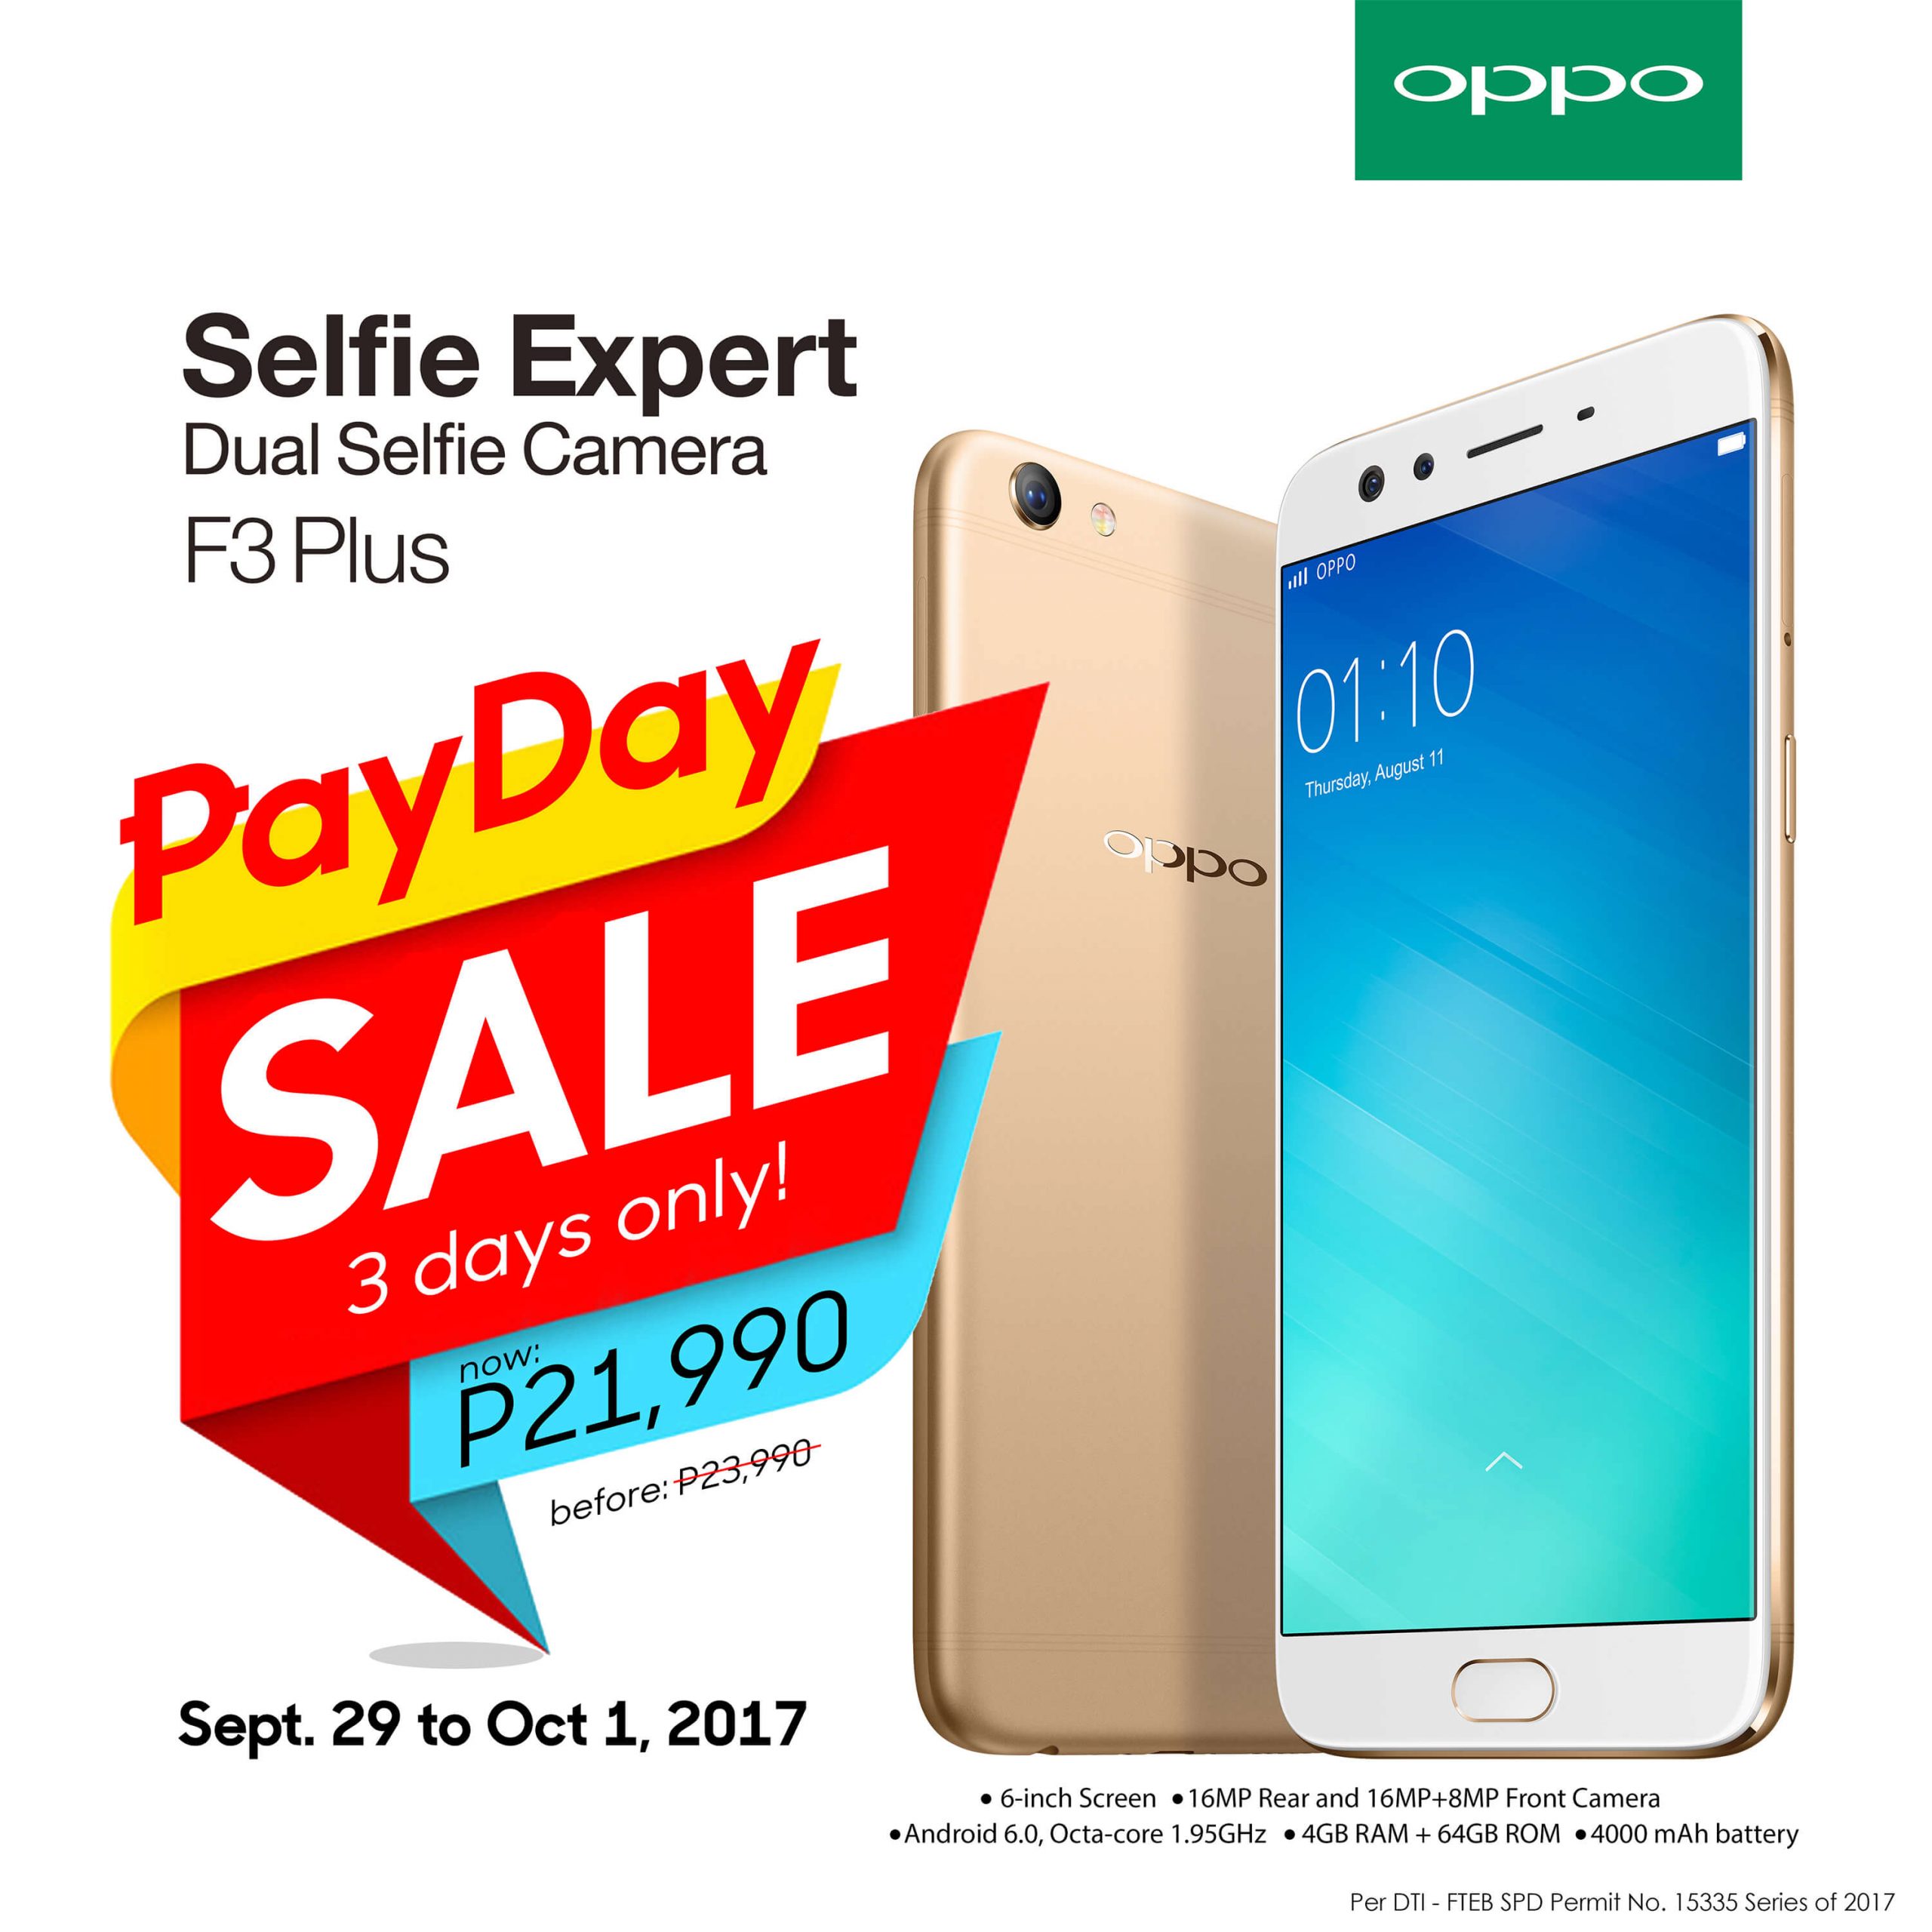 OPPO F3 Plus Gets Weekend Price Cut: Only PhP21,990 Until October 1!